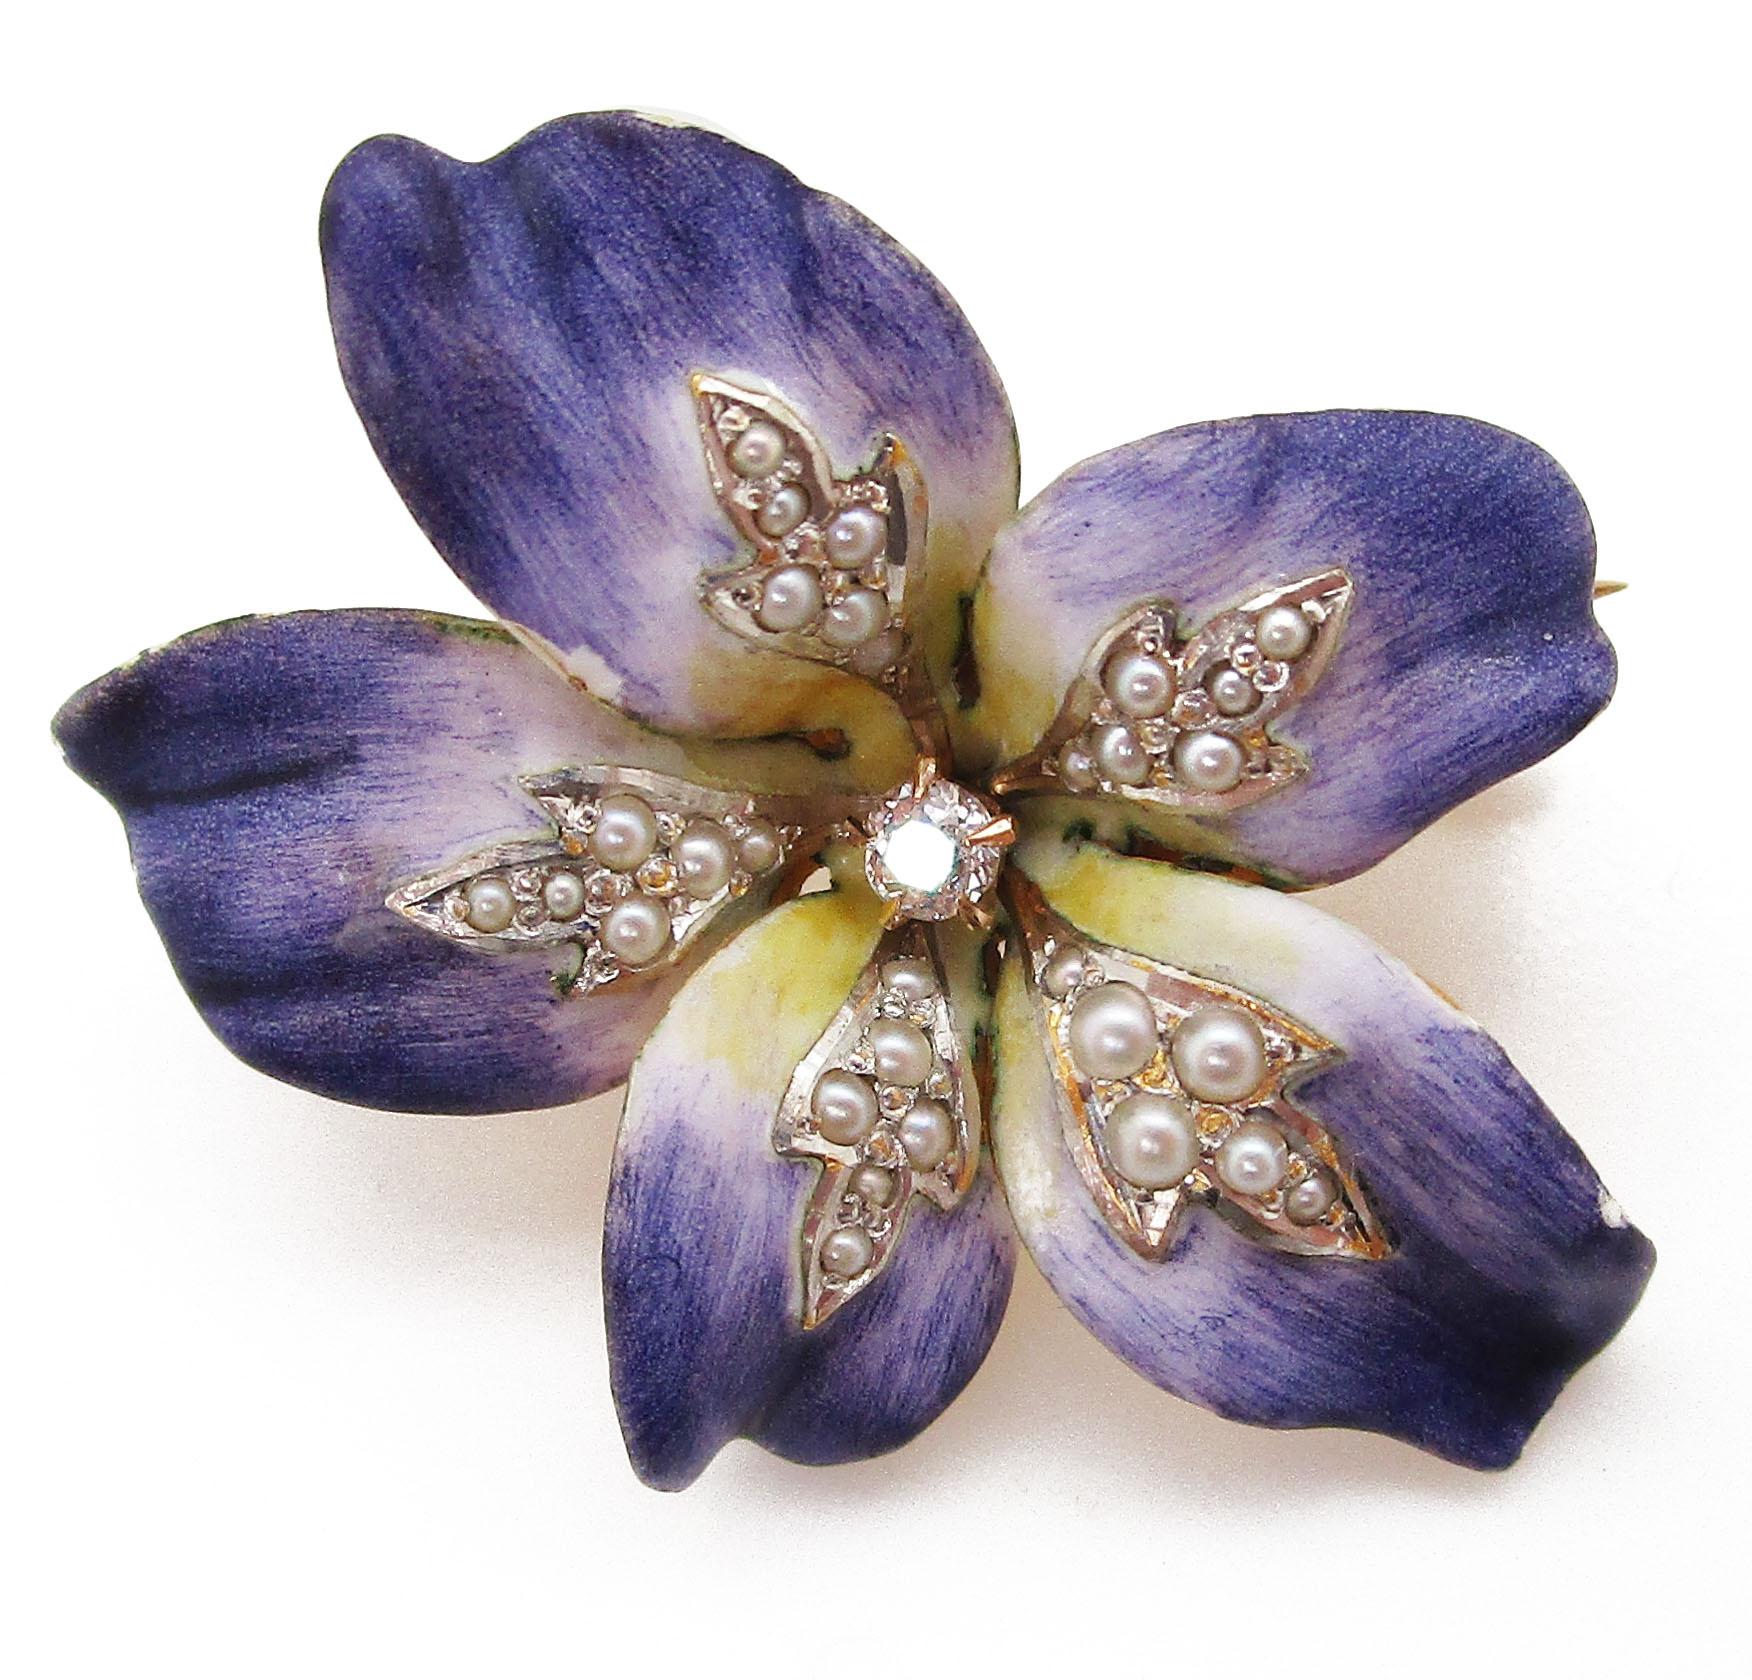 This gorgeous pin pendant is an Art Nouveau style piece that dates back to 1900. It is shaped like a violet and the hand-painted enamel makes the petals look incredibly realistic! The delicate violet tones of the petals look so real that when you